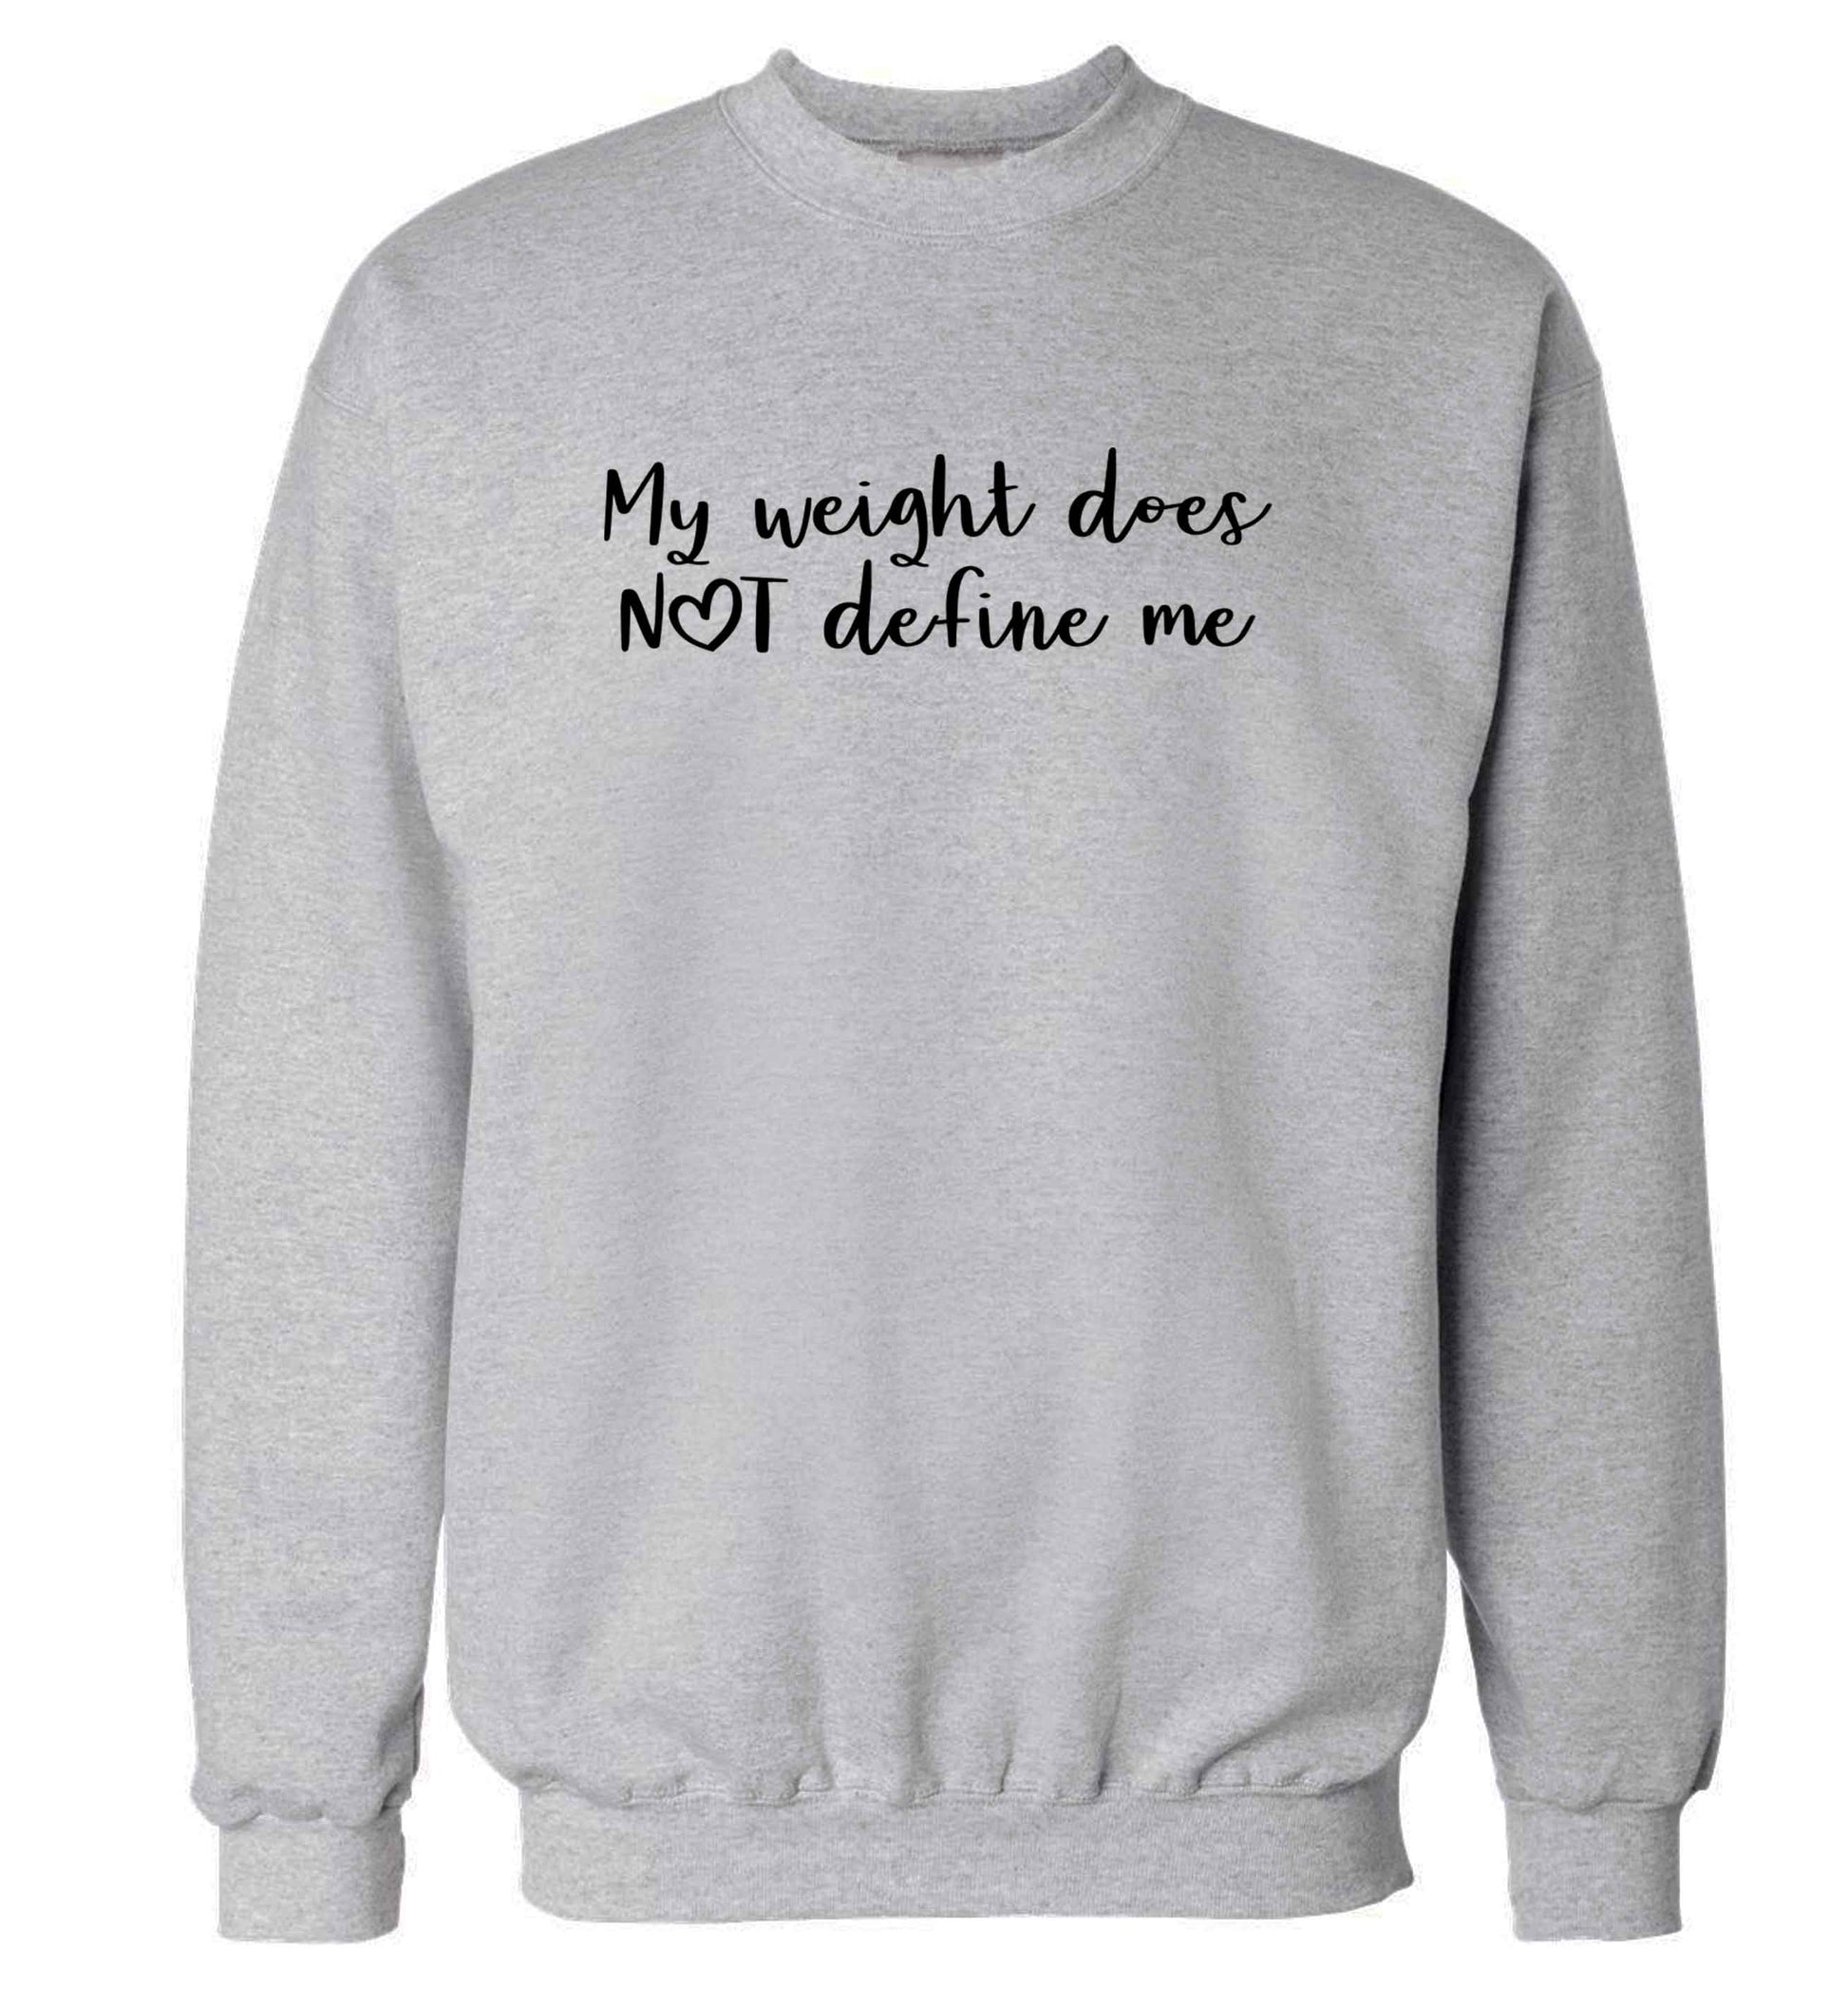 My weight does not define me adult's unisex grey sweater 2XL